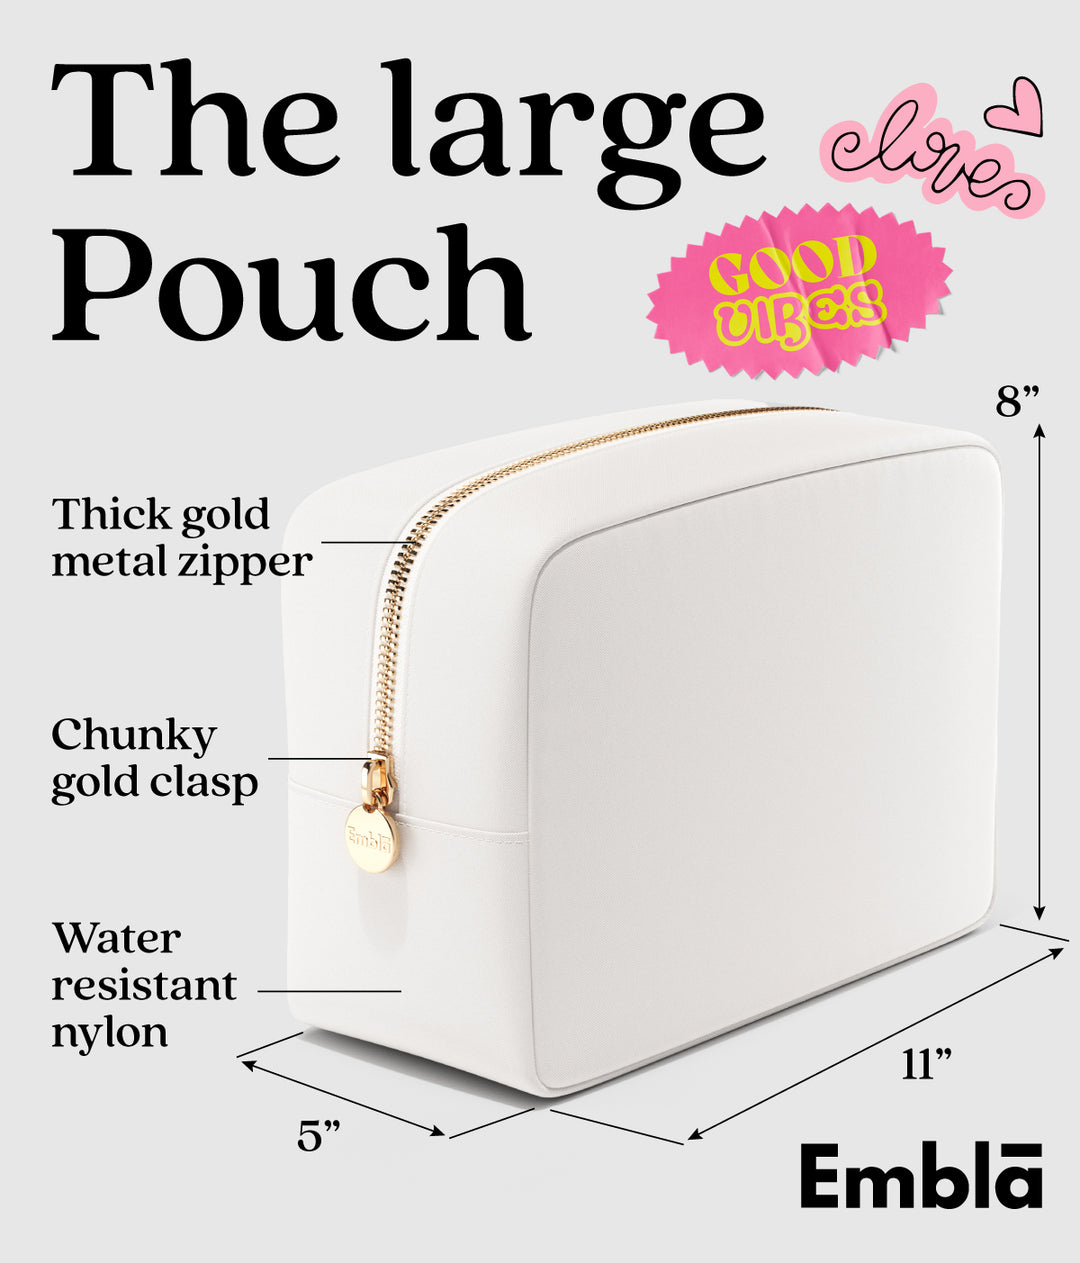 The Large White Pouch